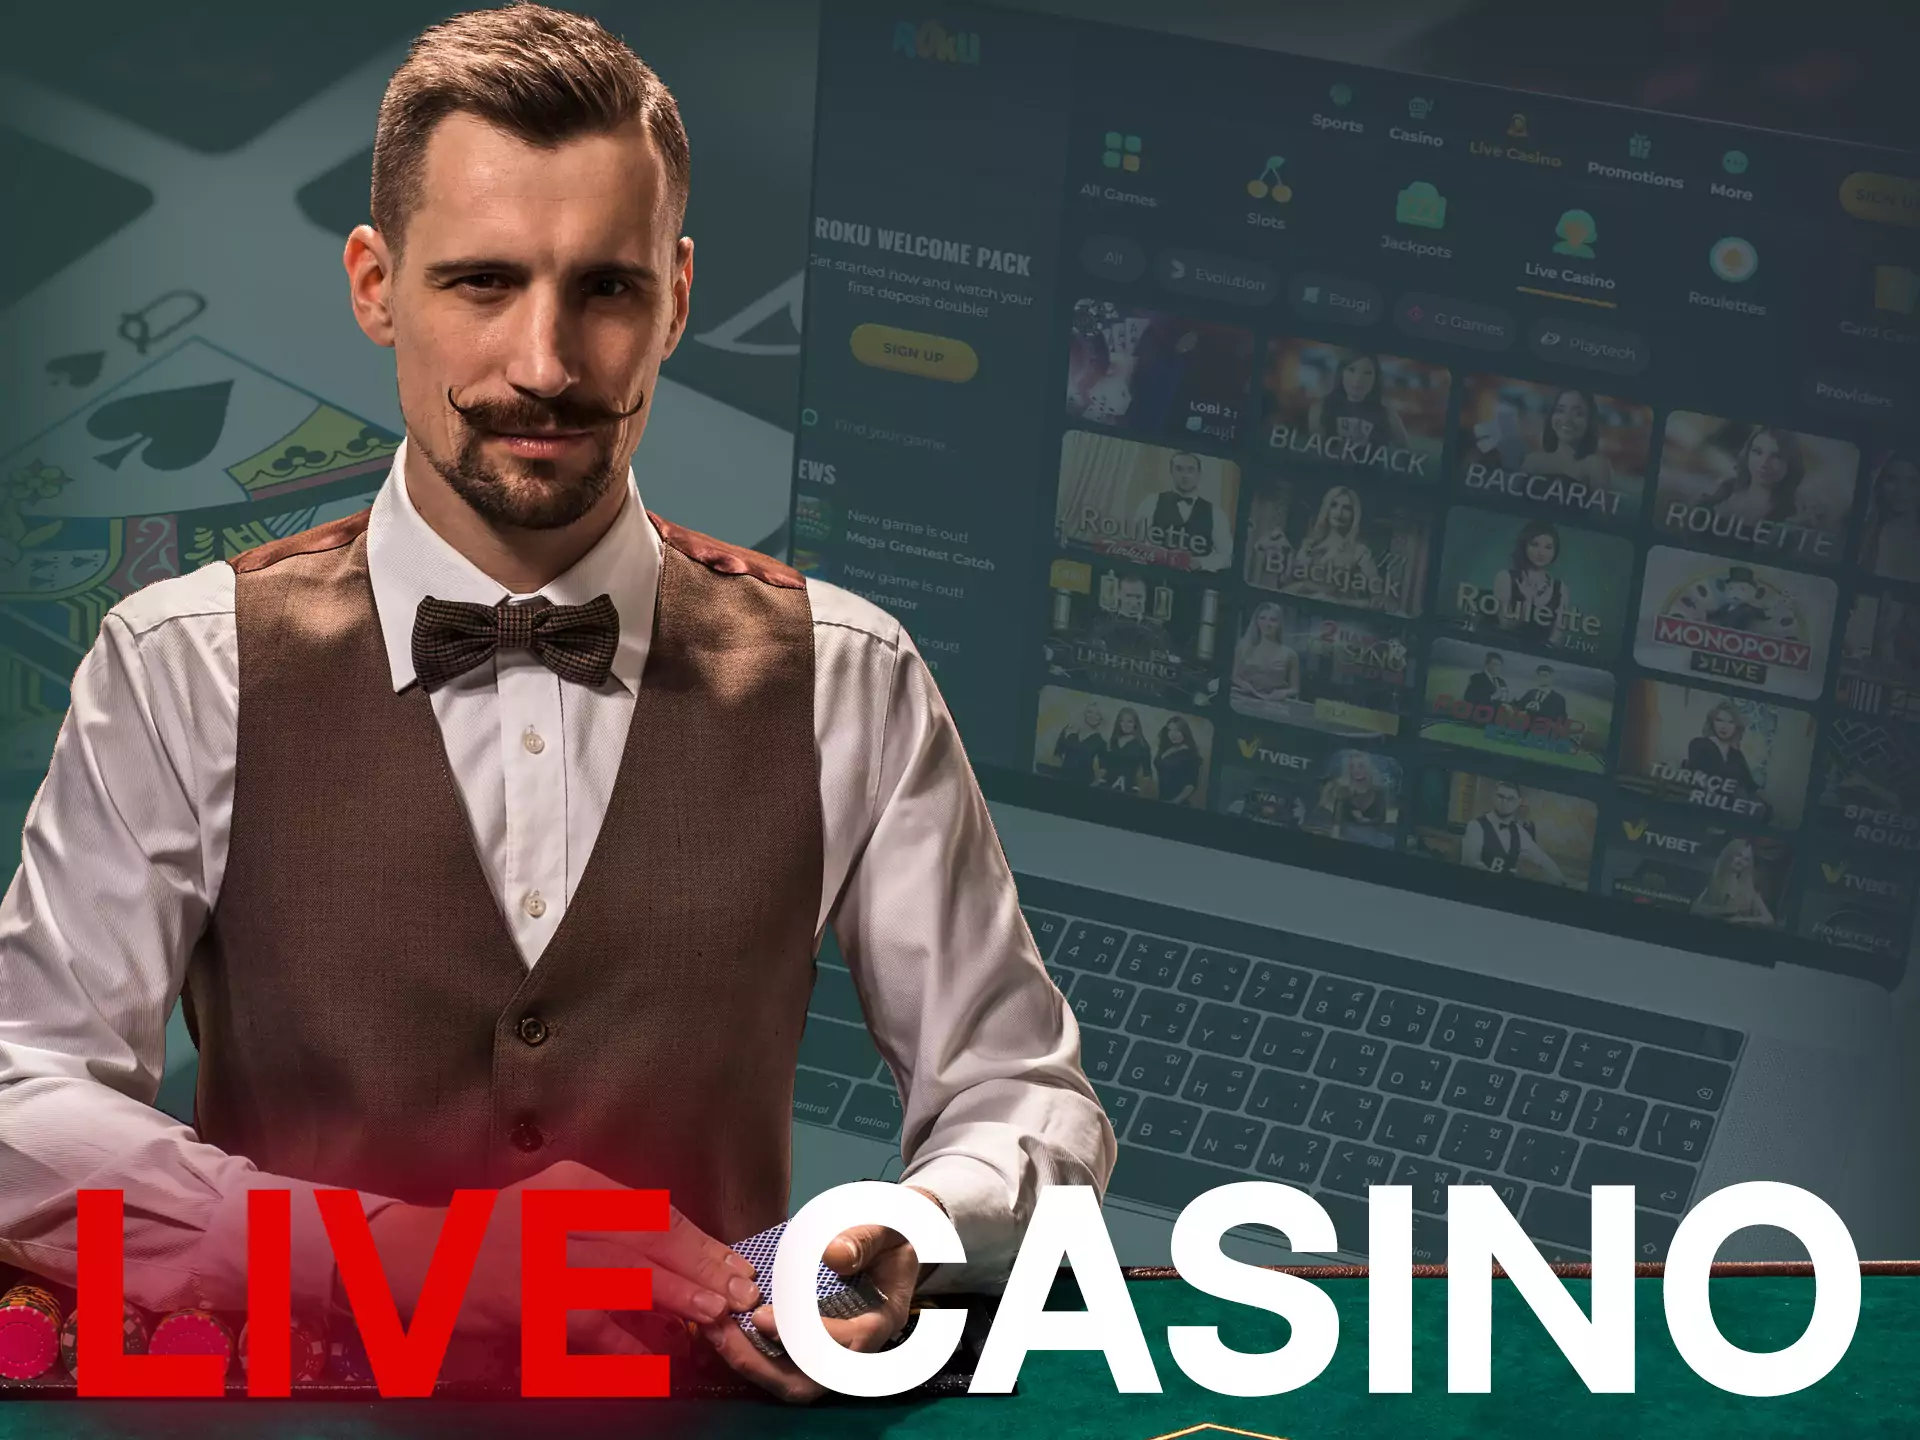 In the Rokubet live casino, you play with a real dealer online.